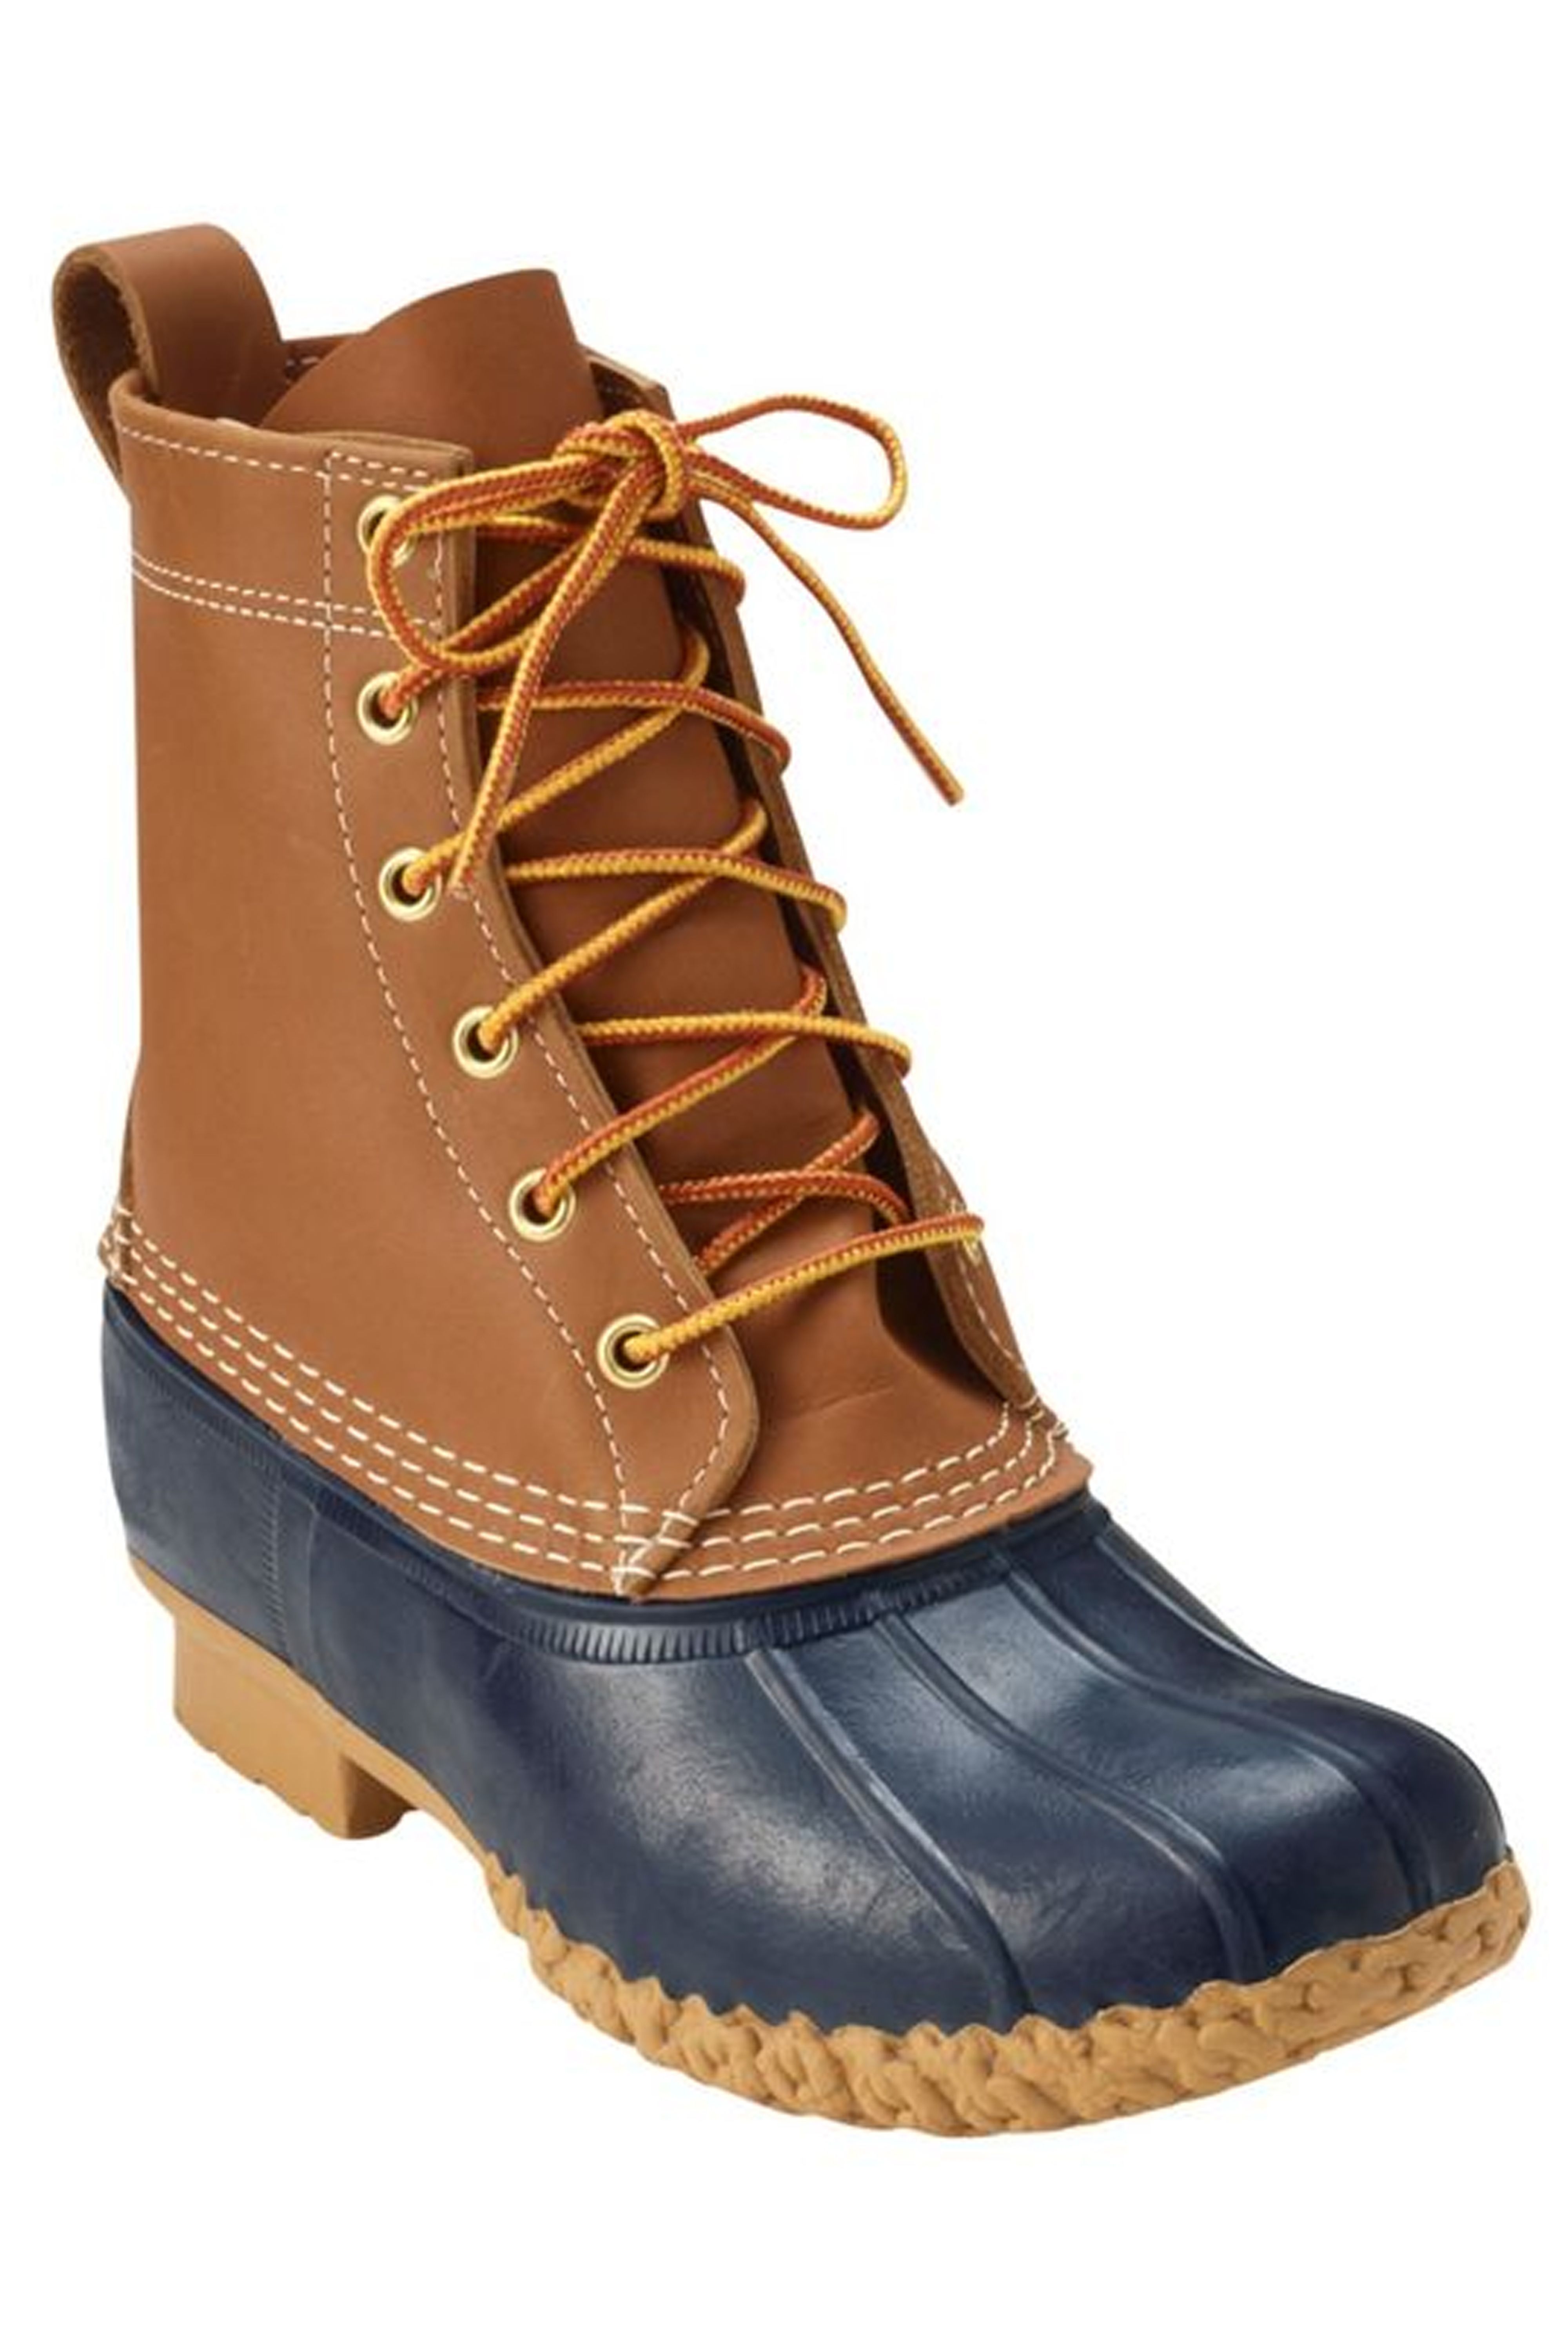 cute fall boots for women